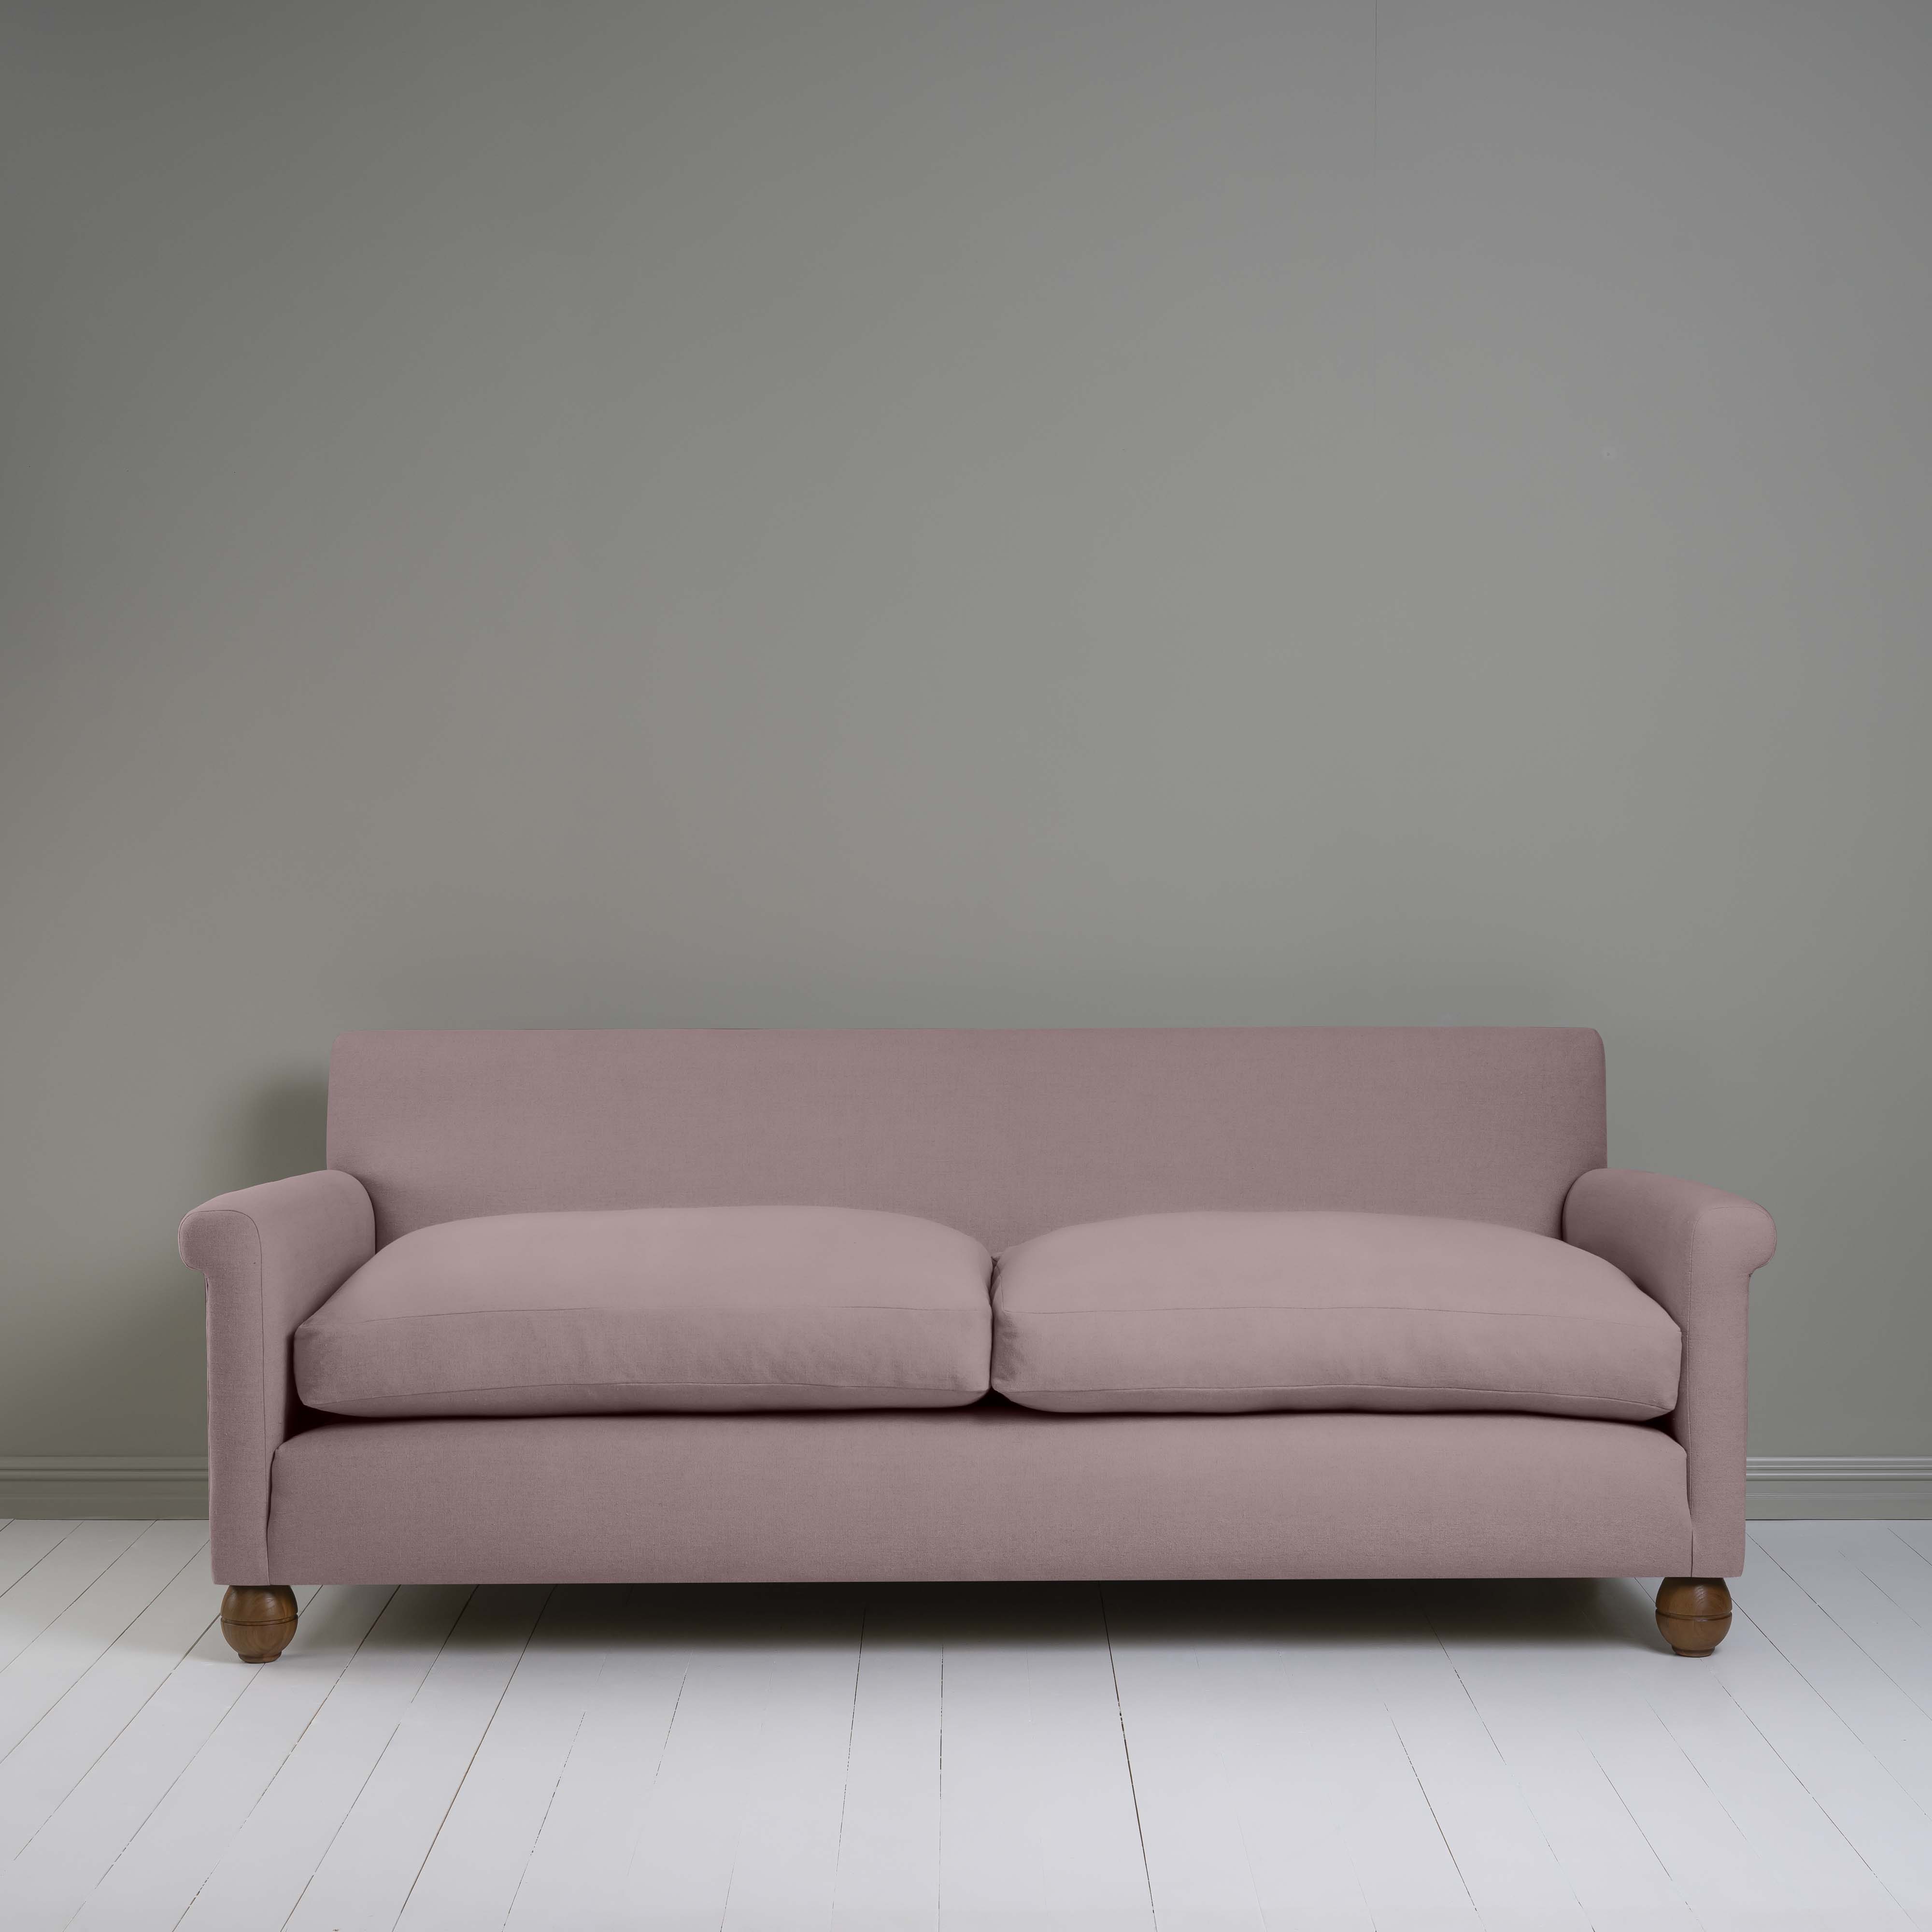  Idler 4 seater sofa in Laidback Linen Heather 